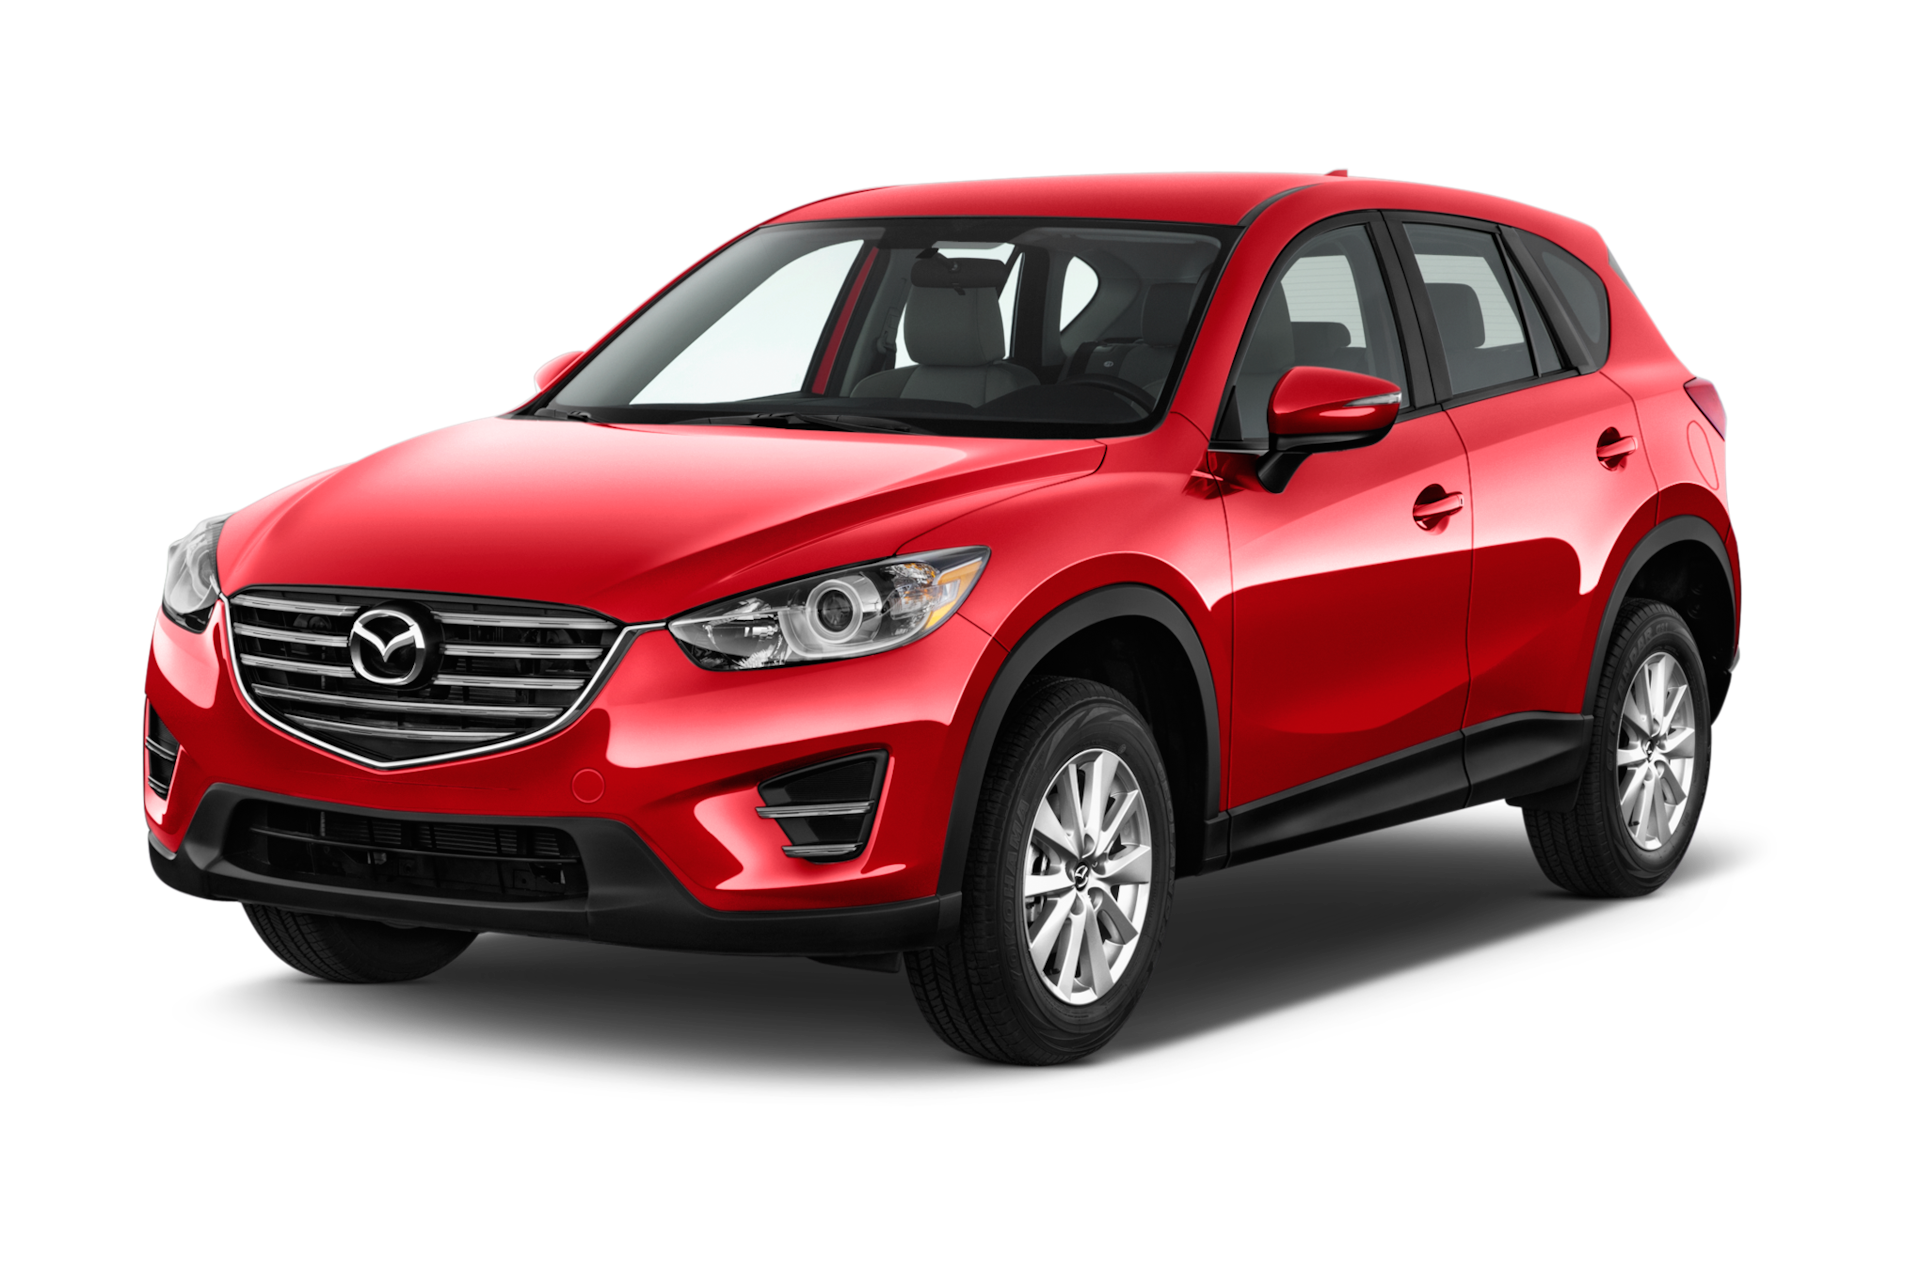 2016 Mazda CX-5 Prices, Reviews, and Photos - MotorTrend